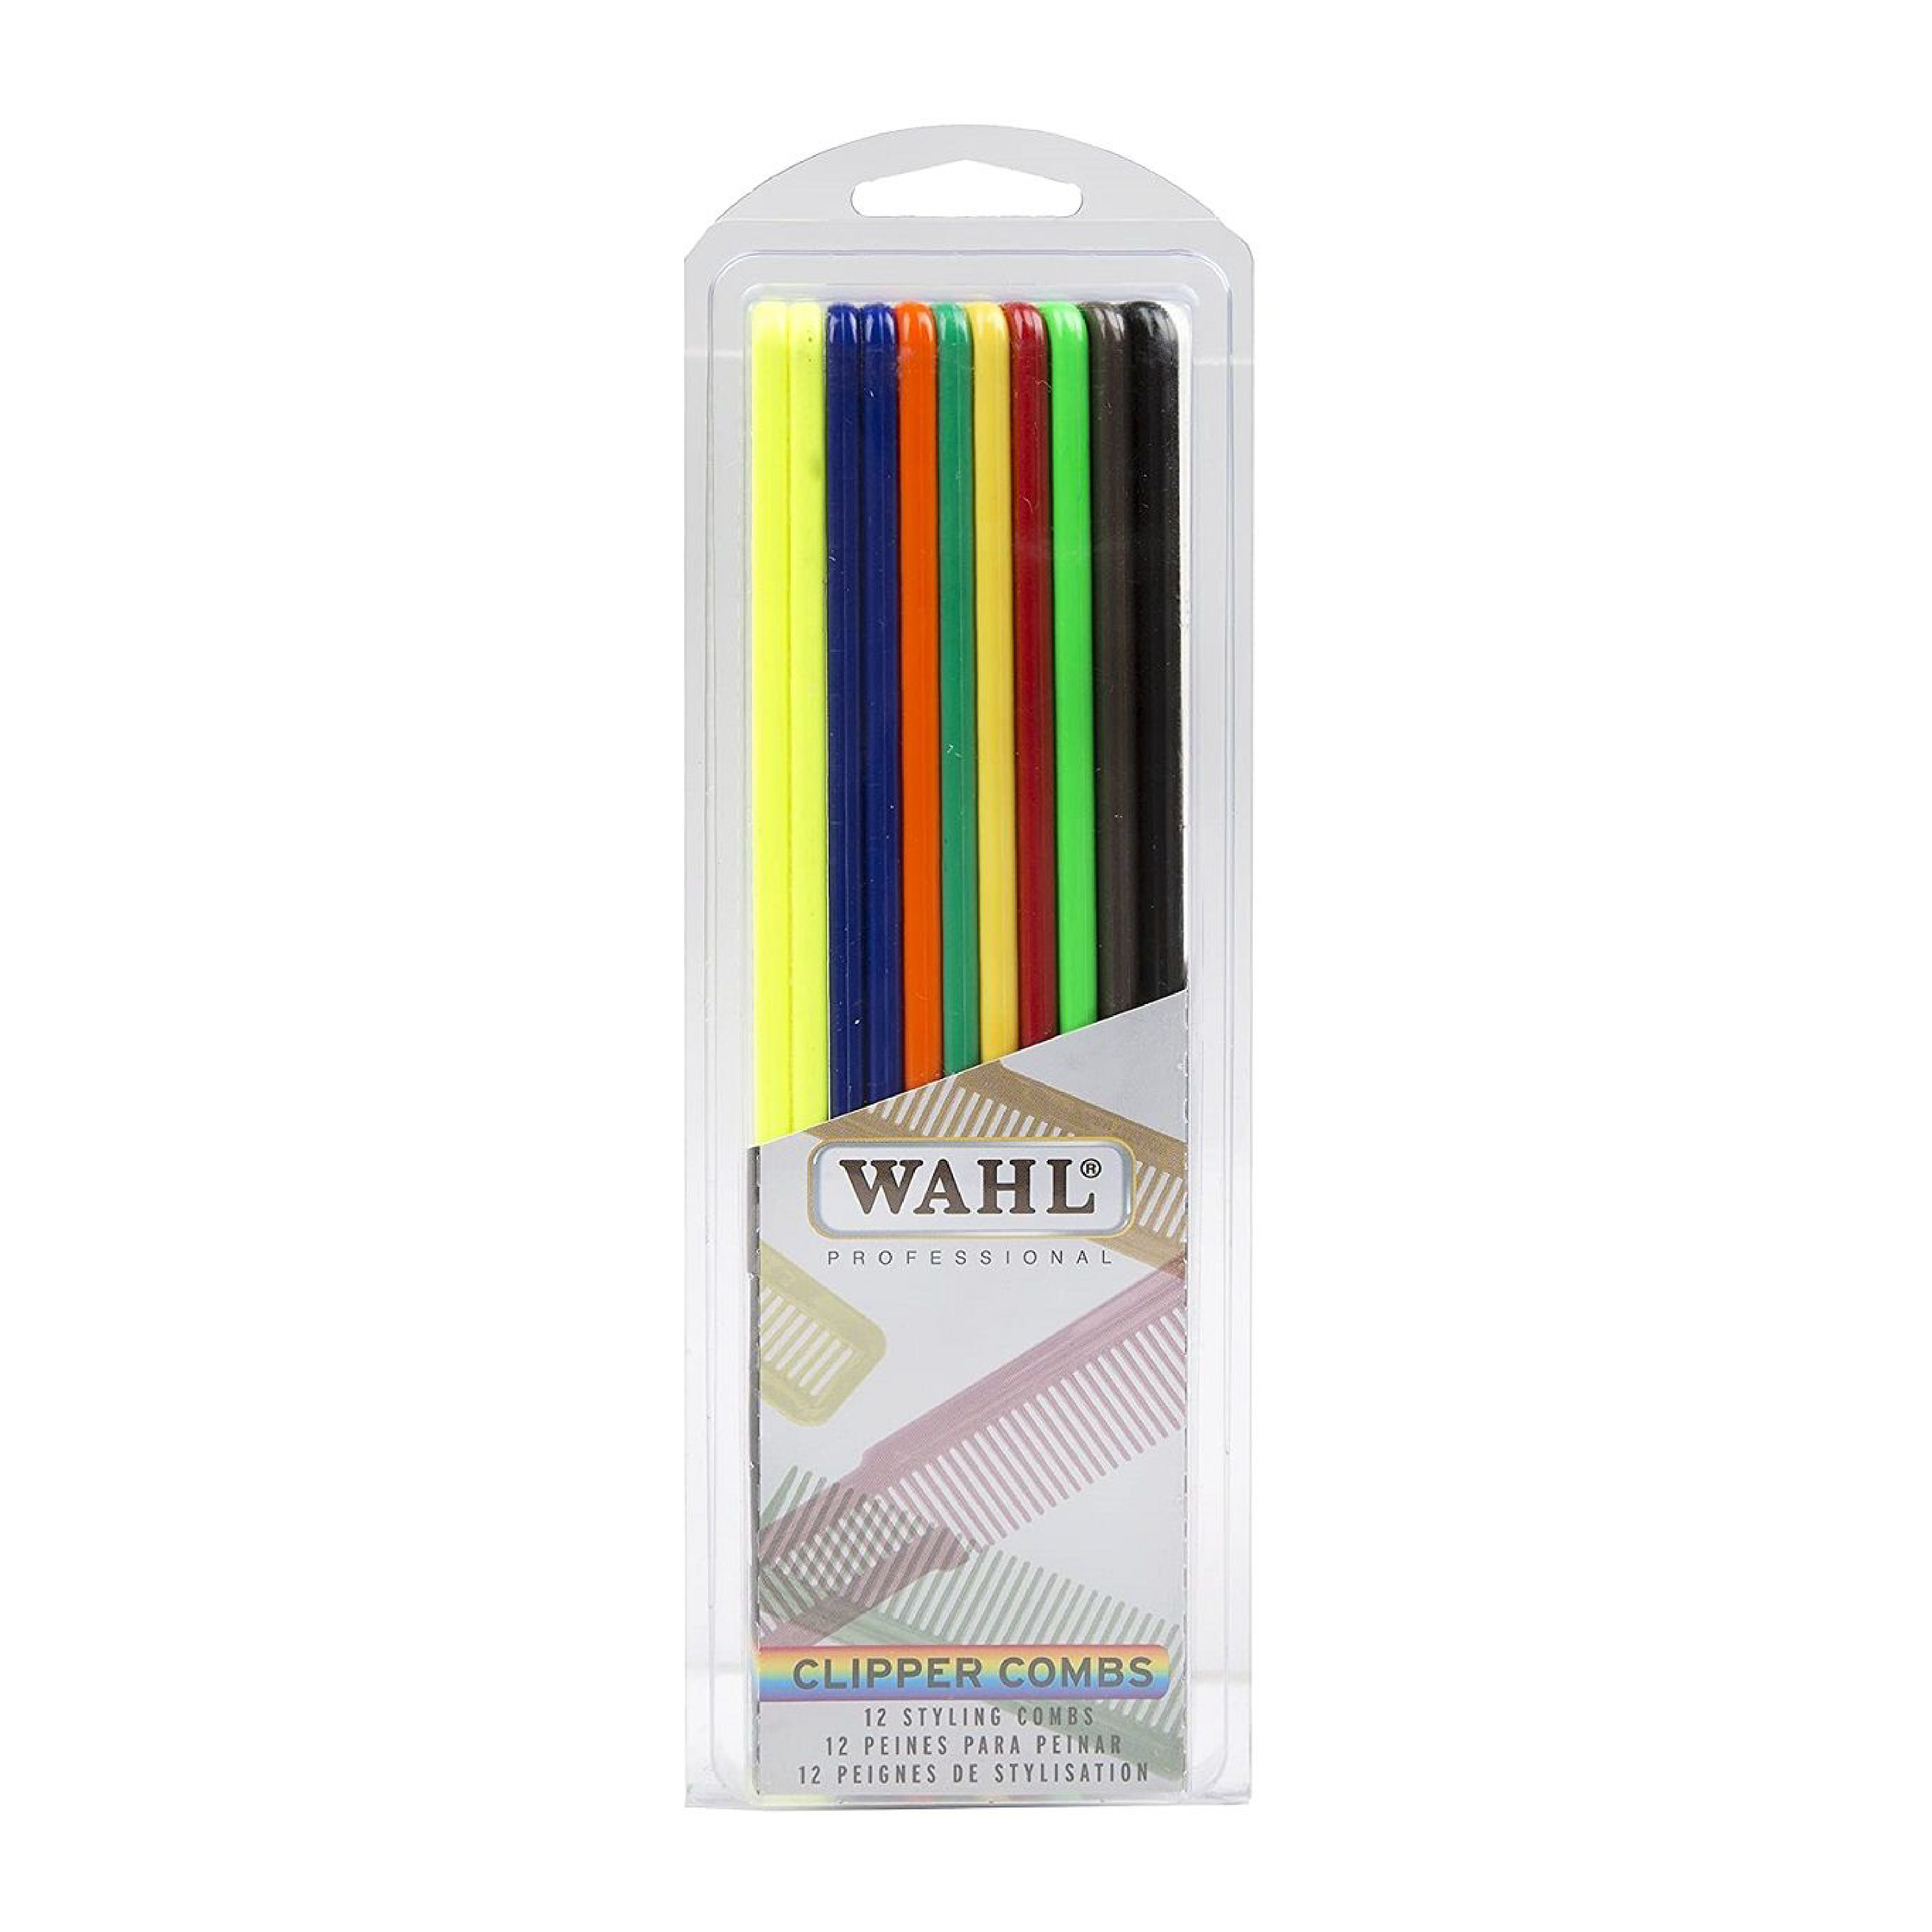 Wahl Professional Assorted Coloured Styling Combs - 12 Pack